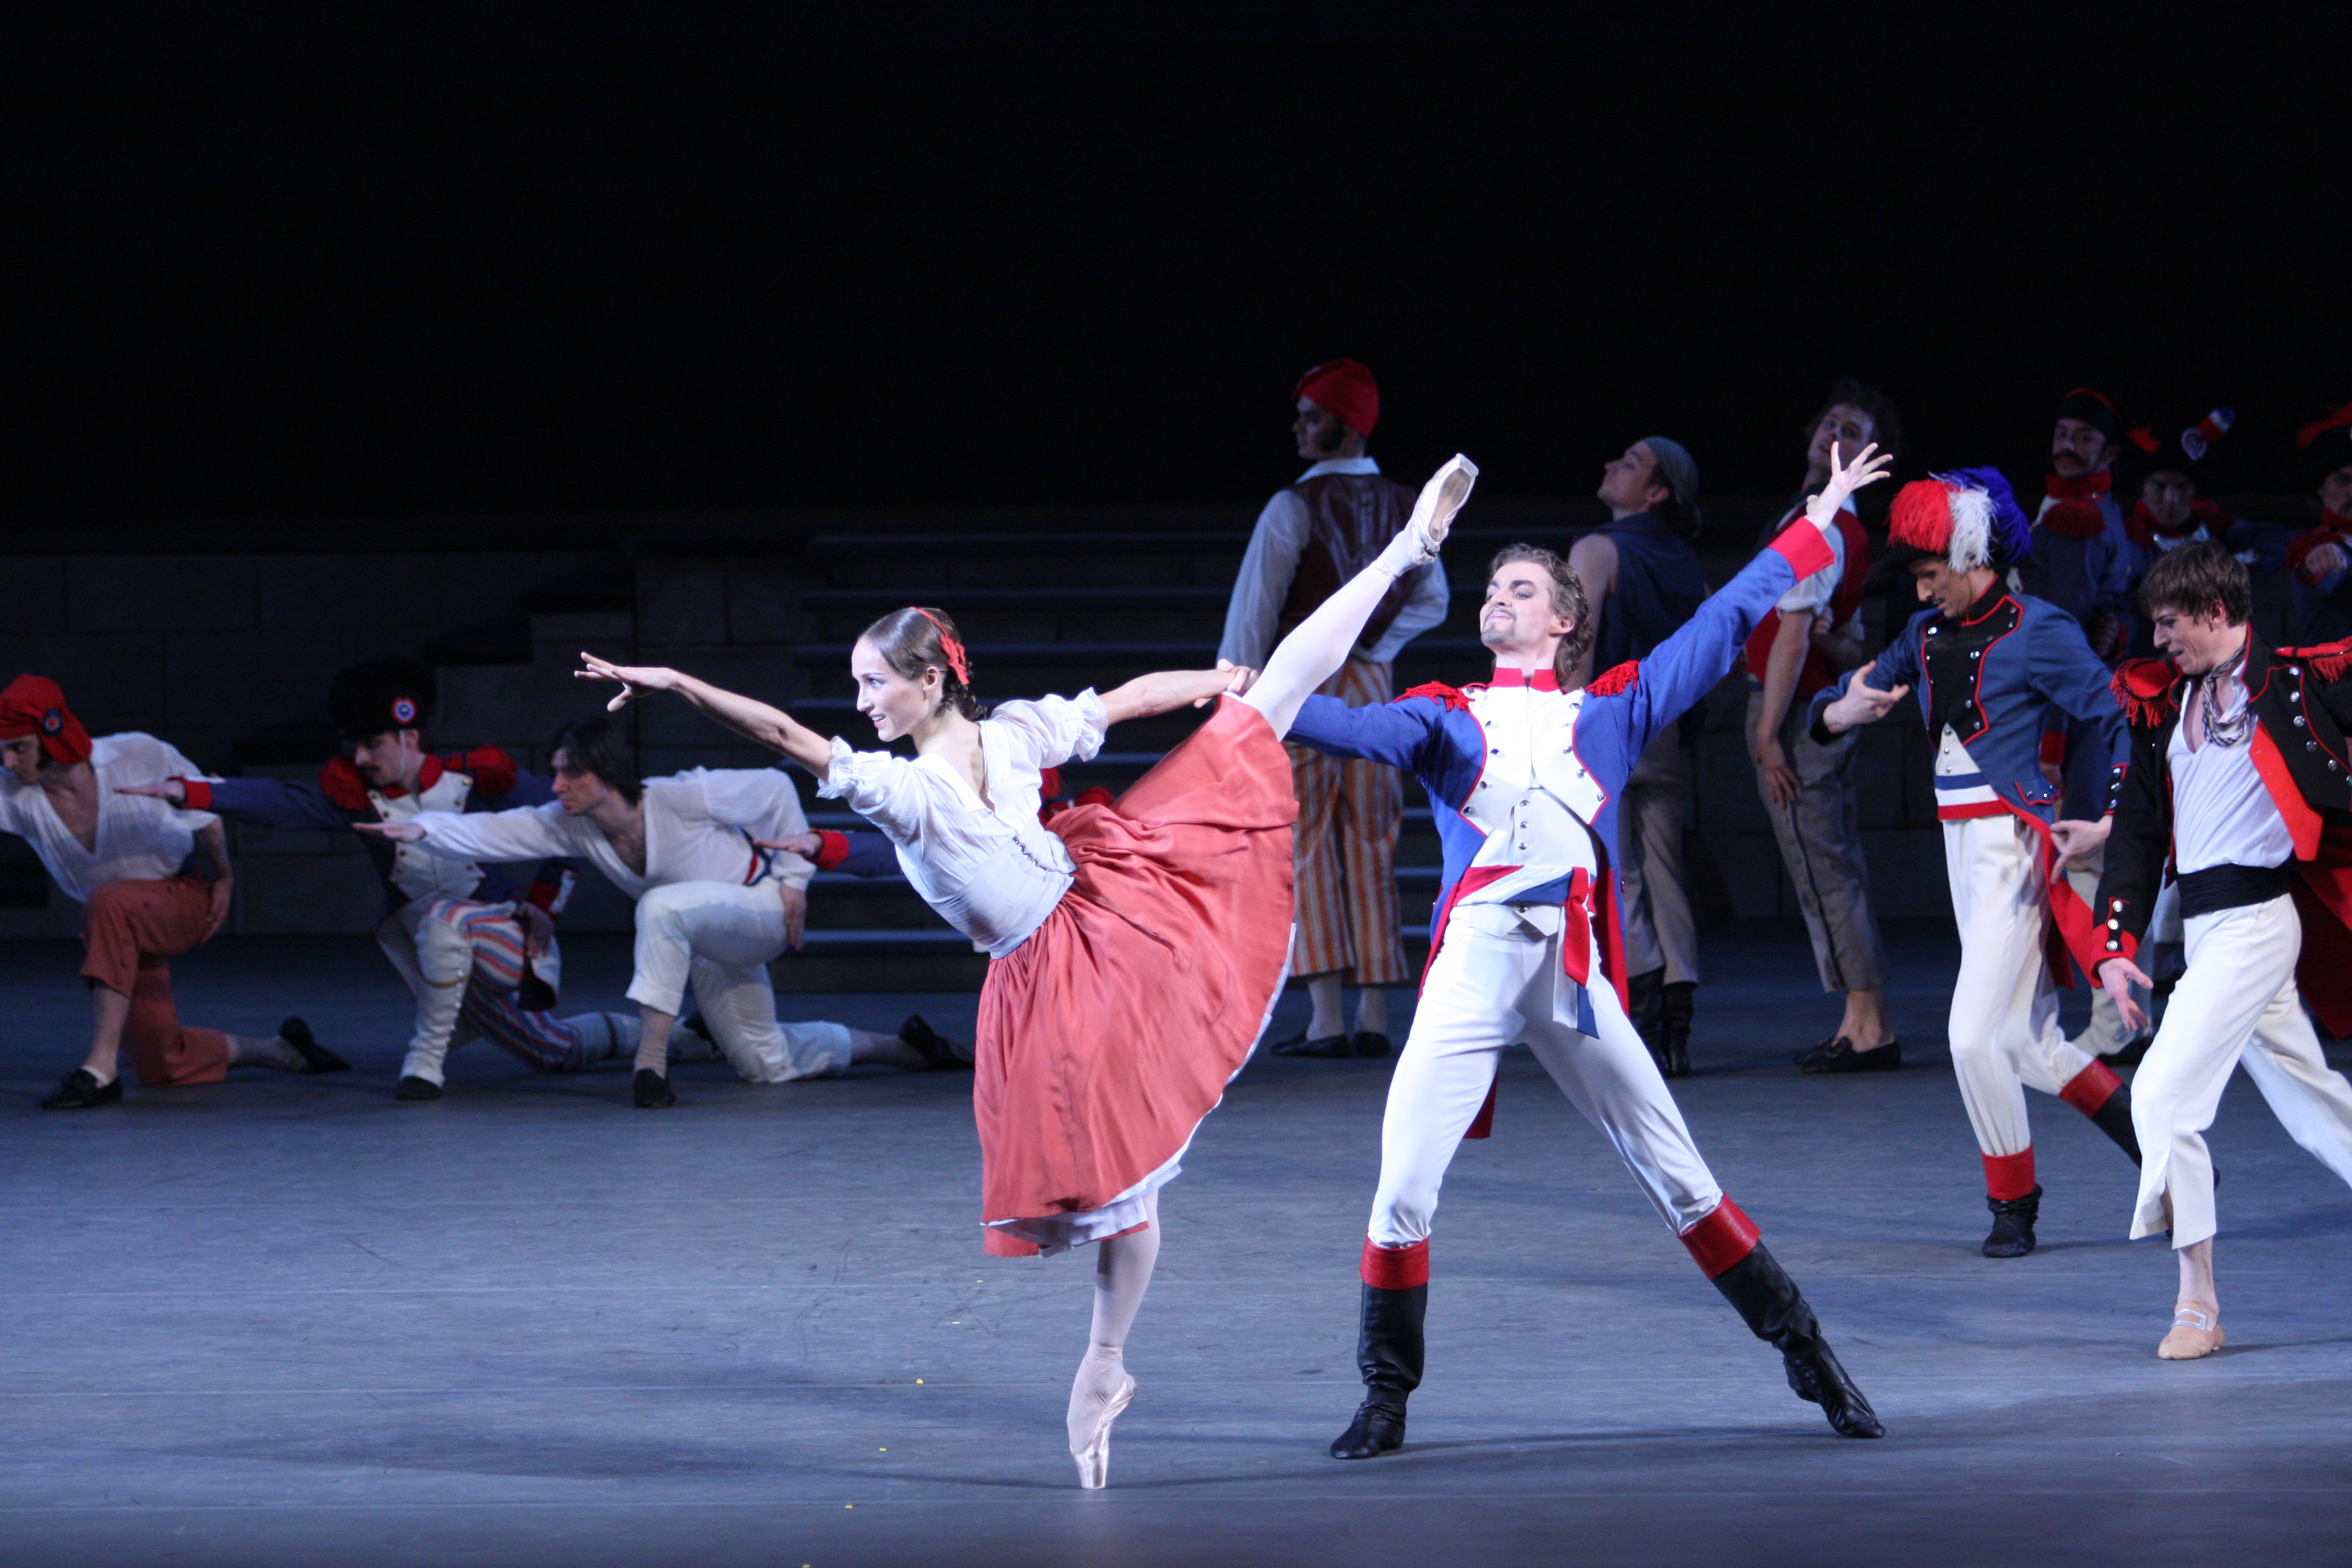 Scene from the Bolshoi Ballet's production of The Flames of Paris.